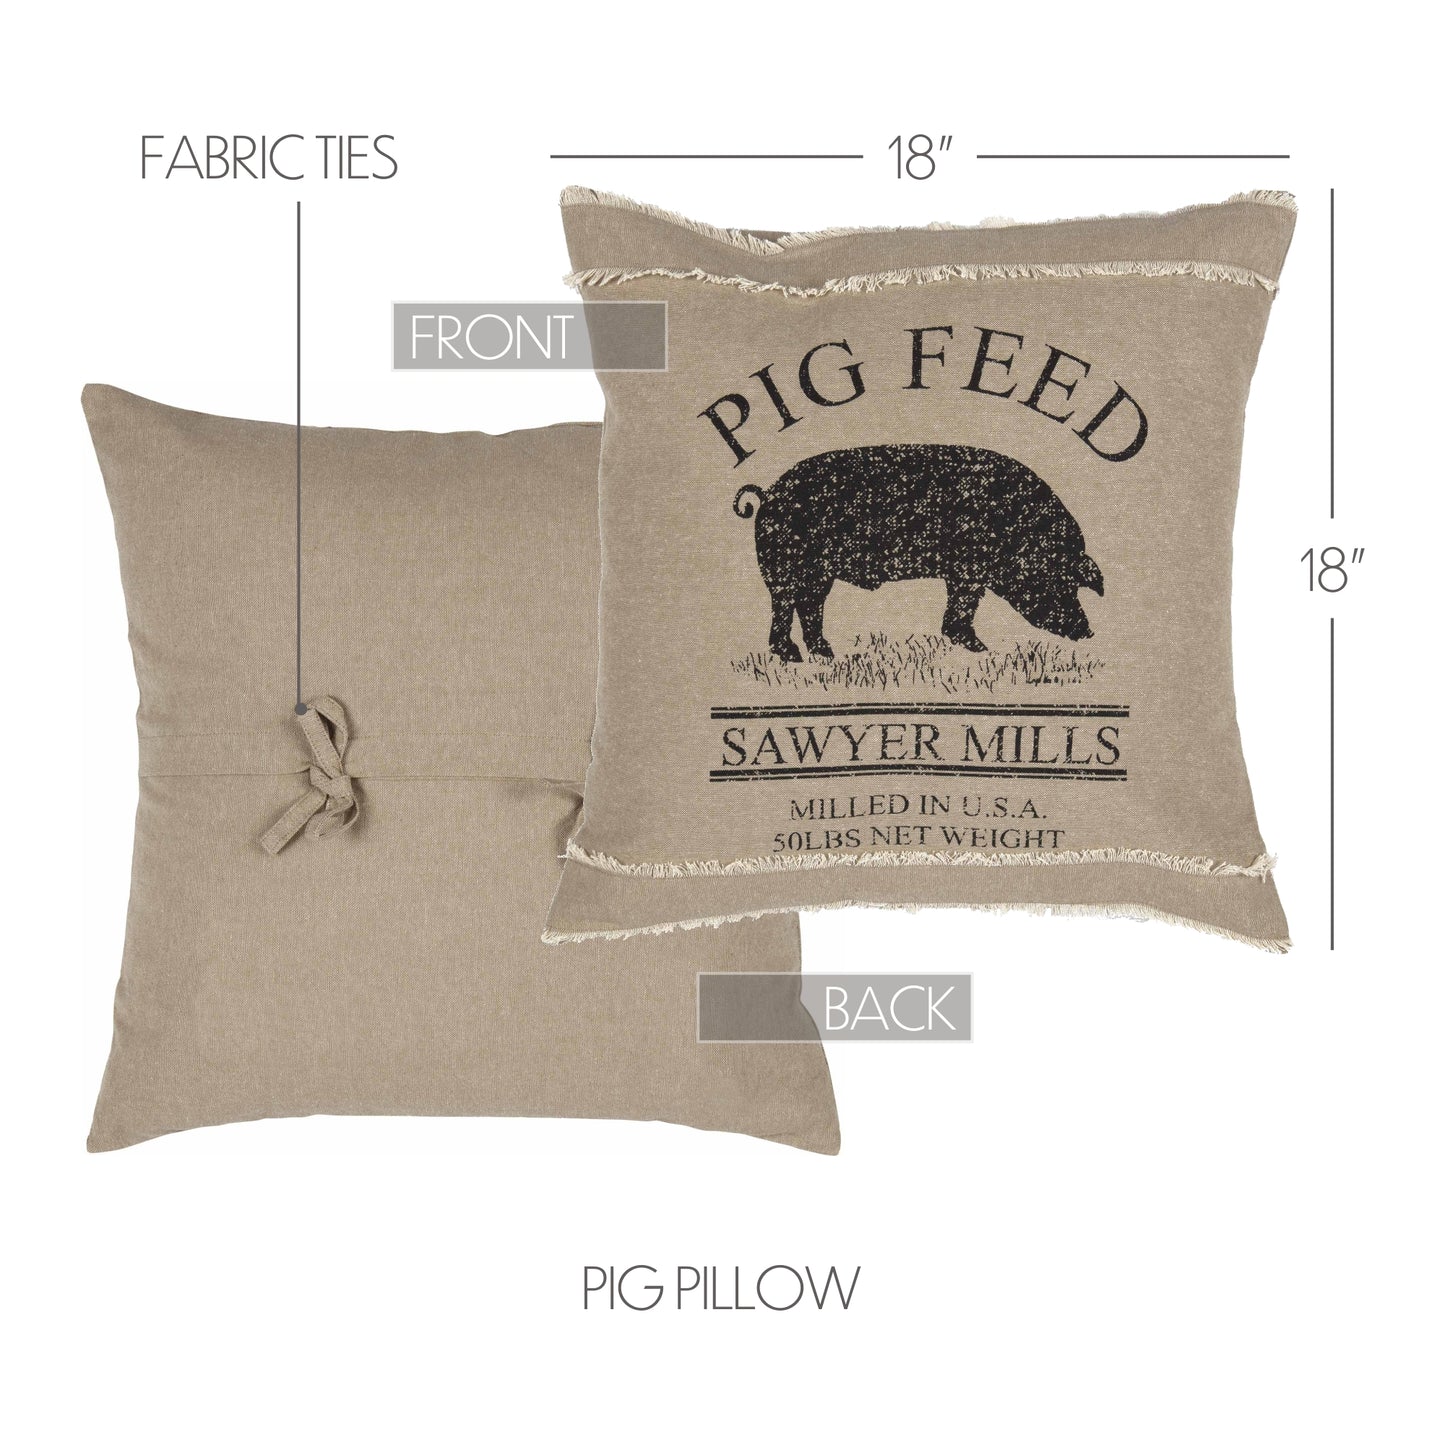 34383-Sawyer-Mill-Charcoal-Pig-Pillow-18x18-image-1